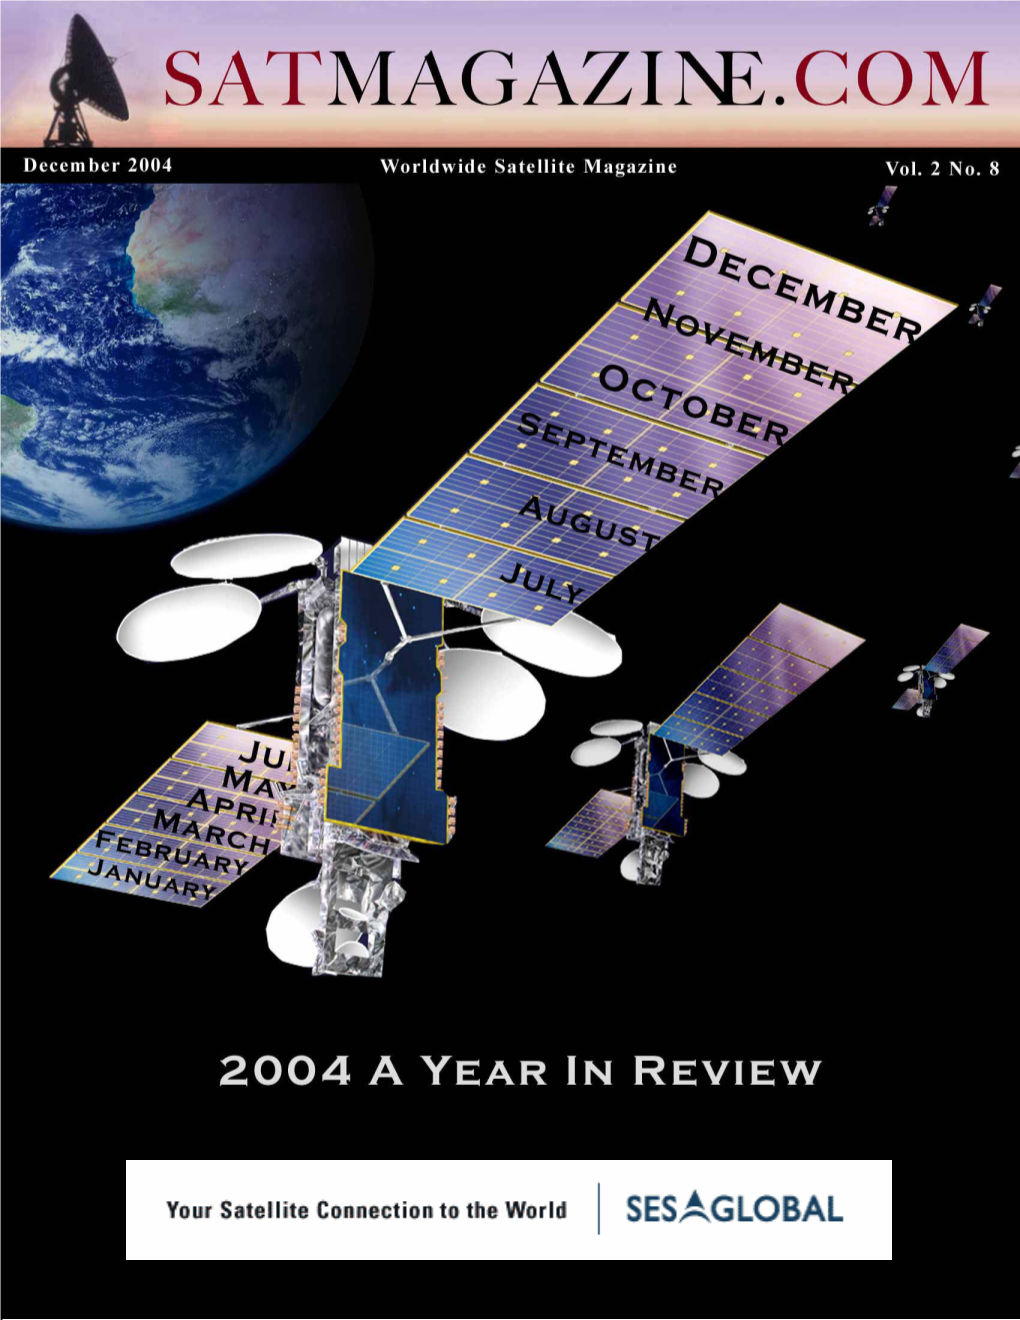 Satellite Broadcasting Services Back to Contents 2 TABLE of CONTENTS Vol